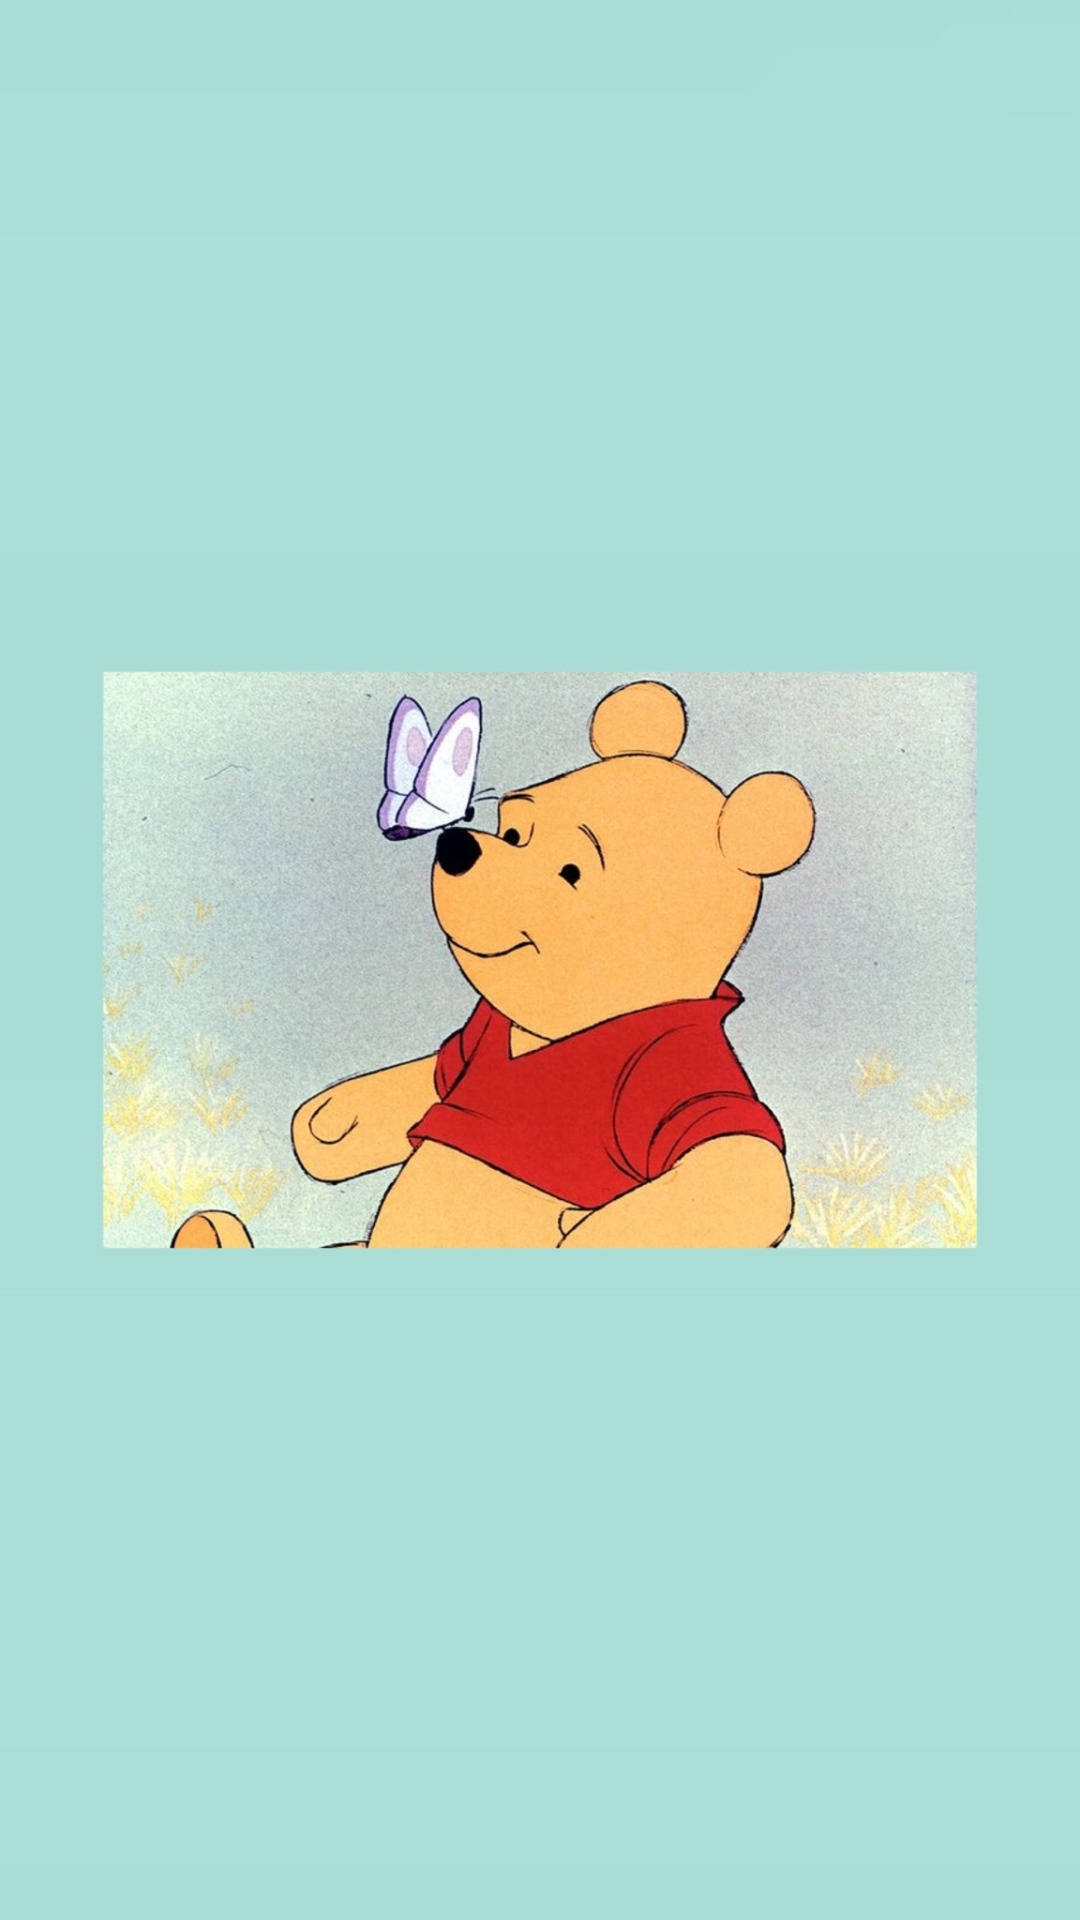 1080X1920 Winnie The Pooh Wallpaper and Background